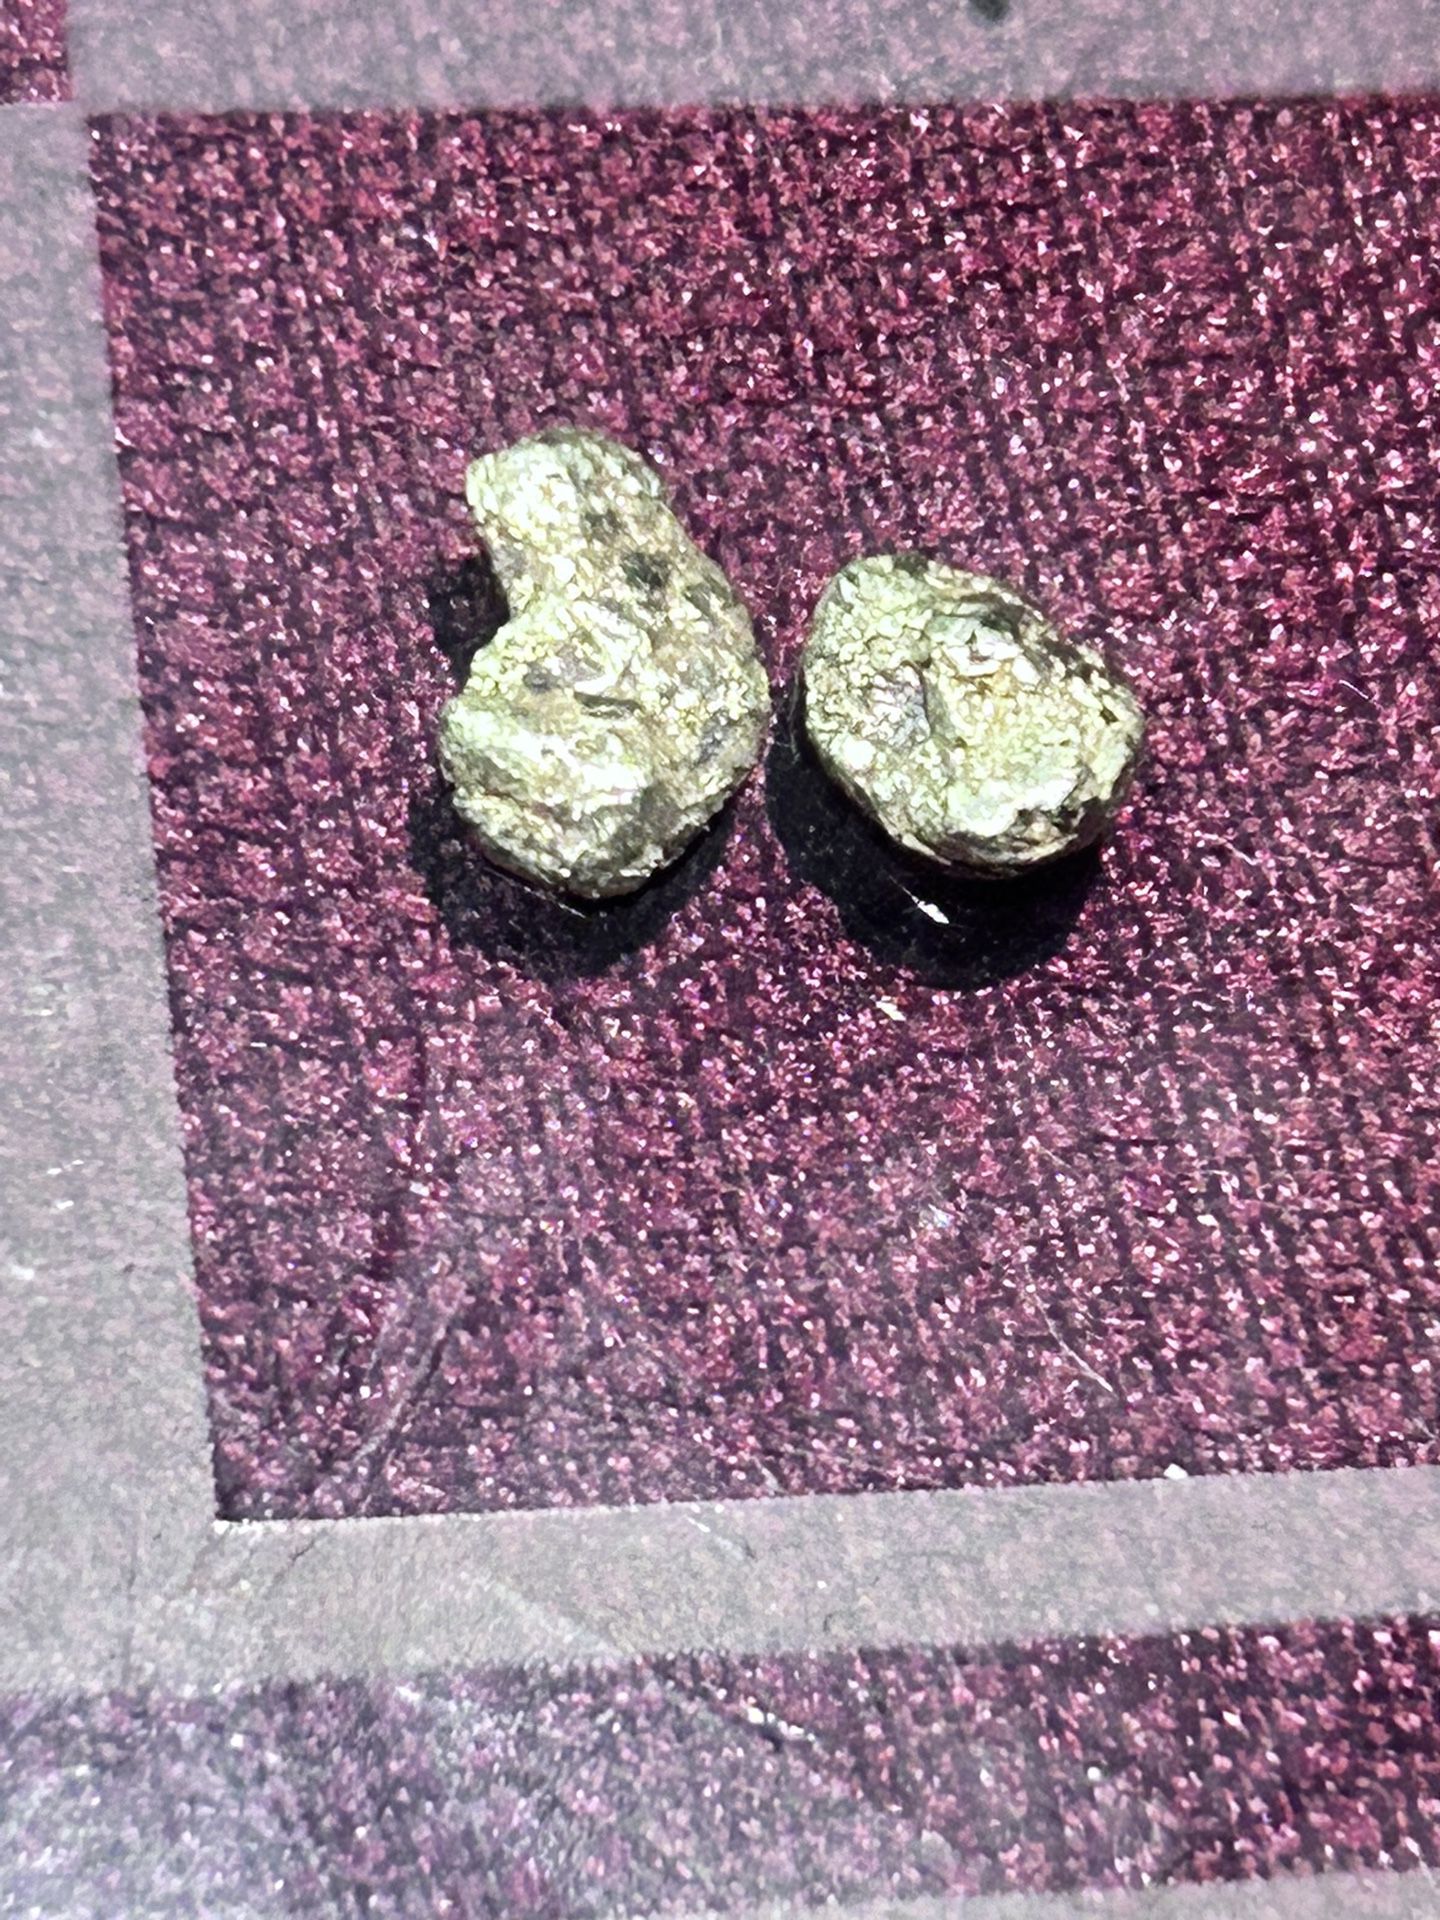 Two nice natural gold nuggets 1.11 g